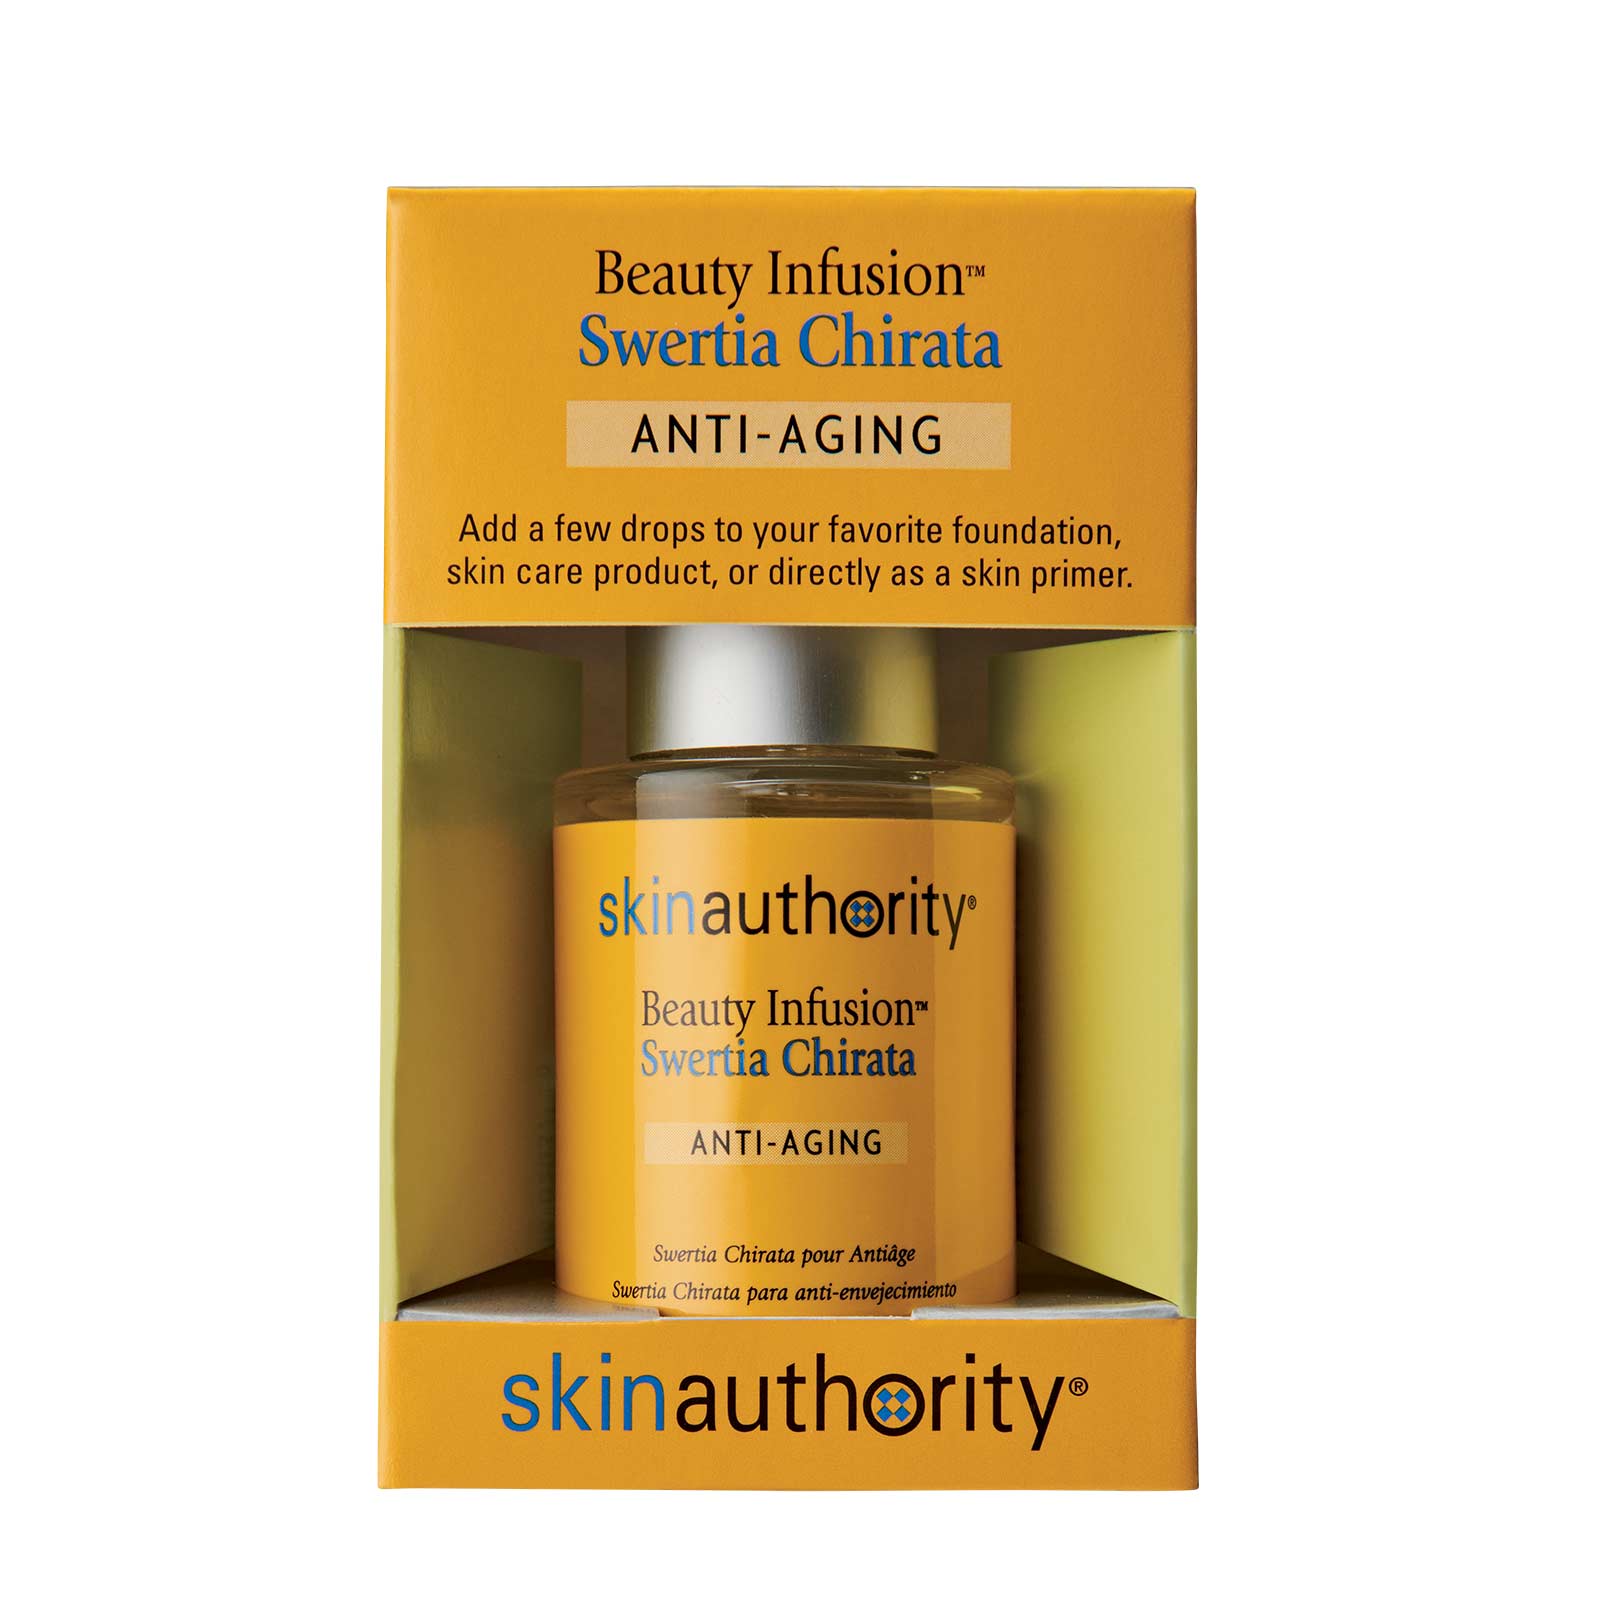 Beauty Infusion Swertia Chirata for Anti-Aging  carton packaging by Skin Authority